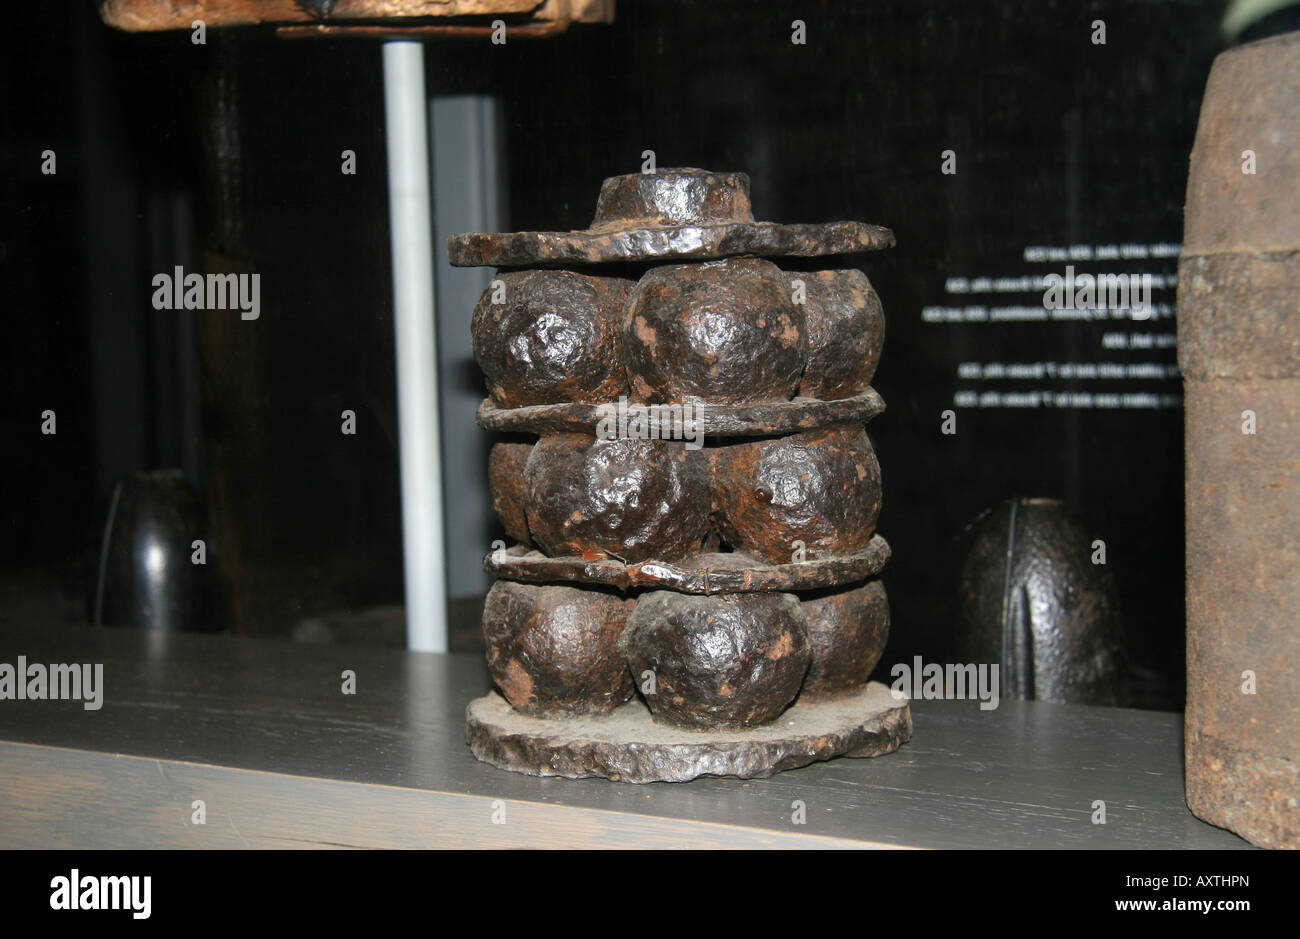 An original artillery shot canister from the American Civil War on display at the Tredegar Iron Works, Richmond, VA. Stock Photo